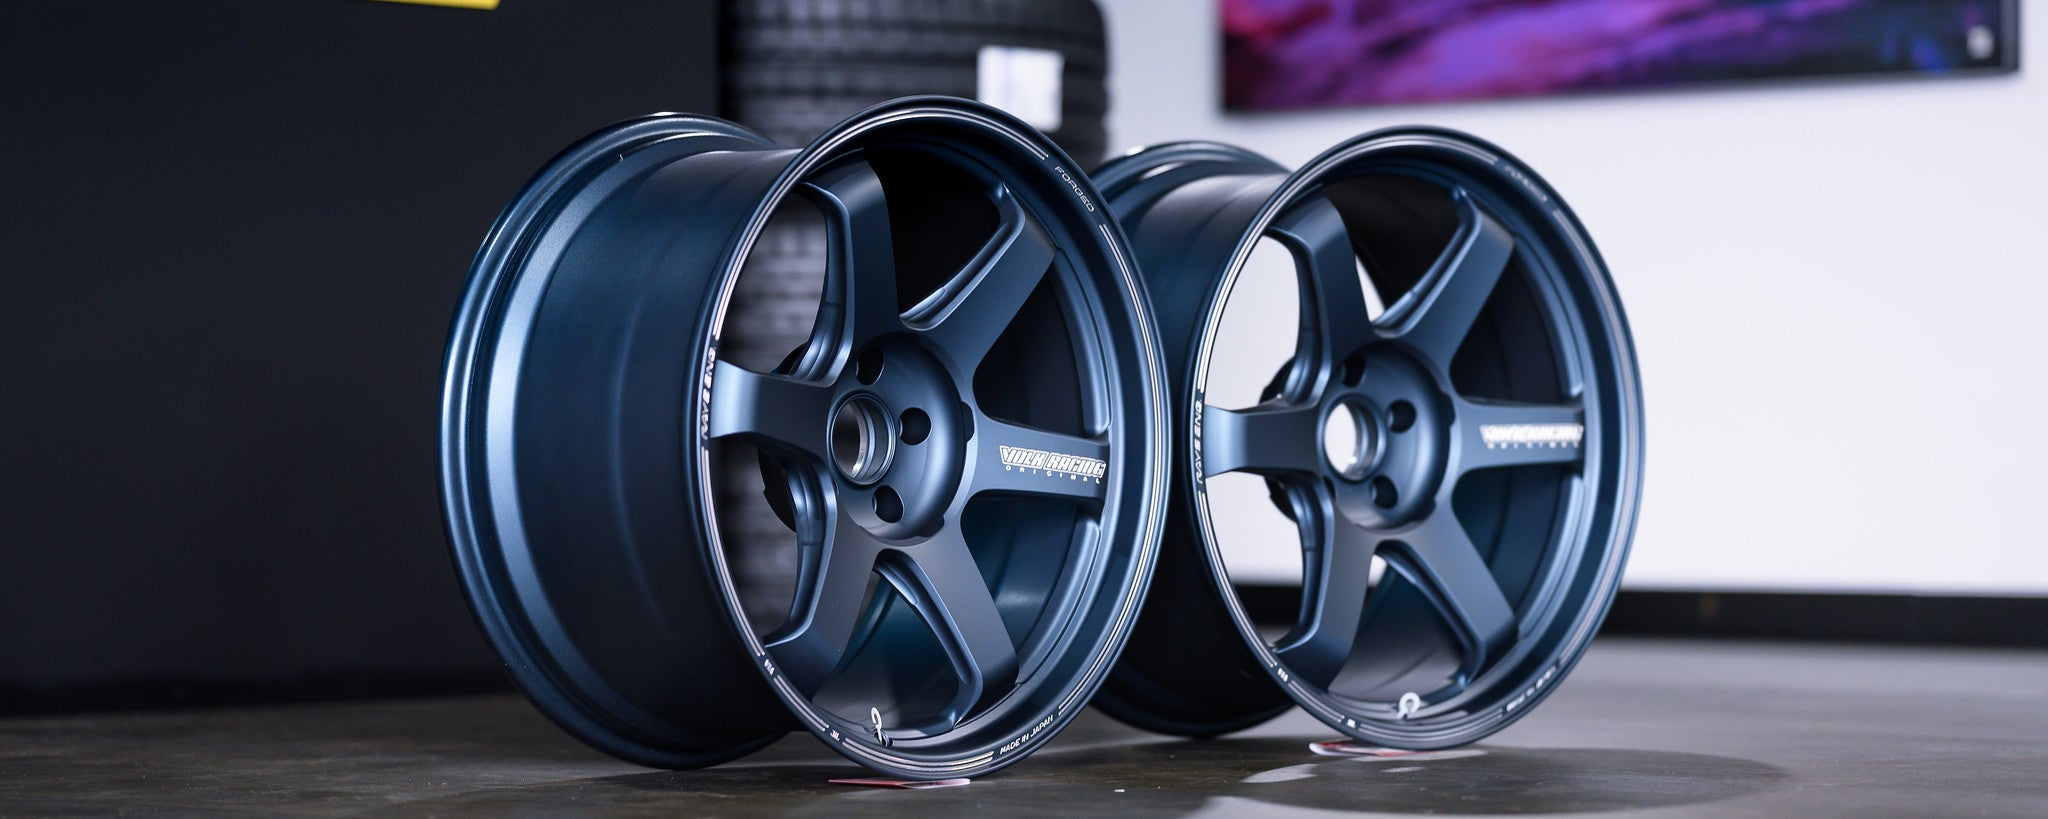 Volk Racing TE37 Ultra Track Edition II R35 GT-R - Premium Wheels from Volk Racing - From just $6890.00! Shop now at MK MOTORSPORTS